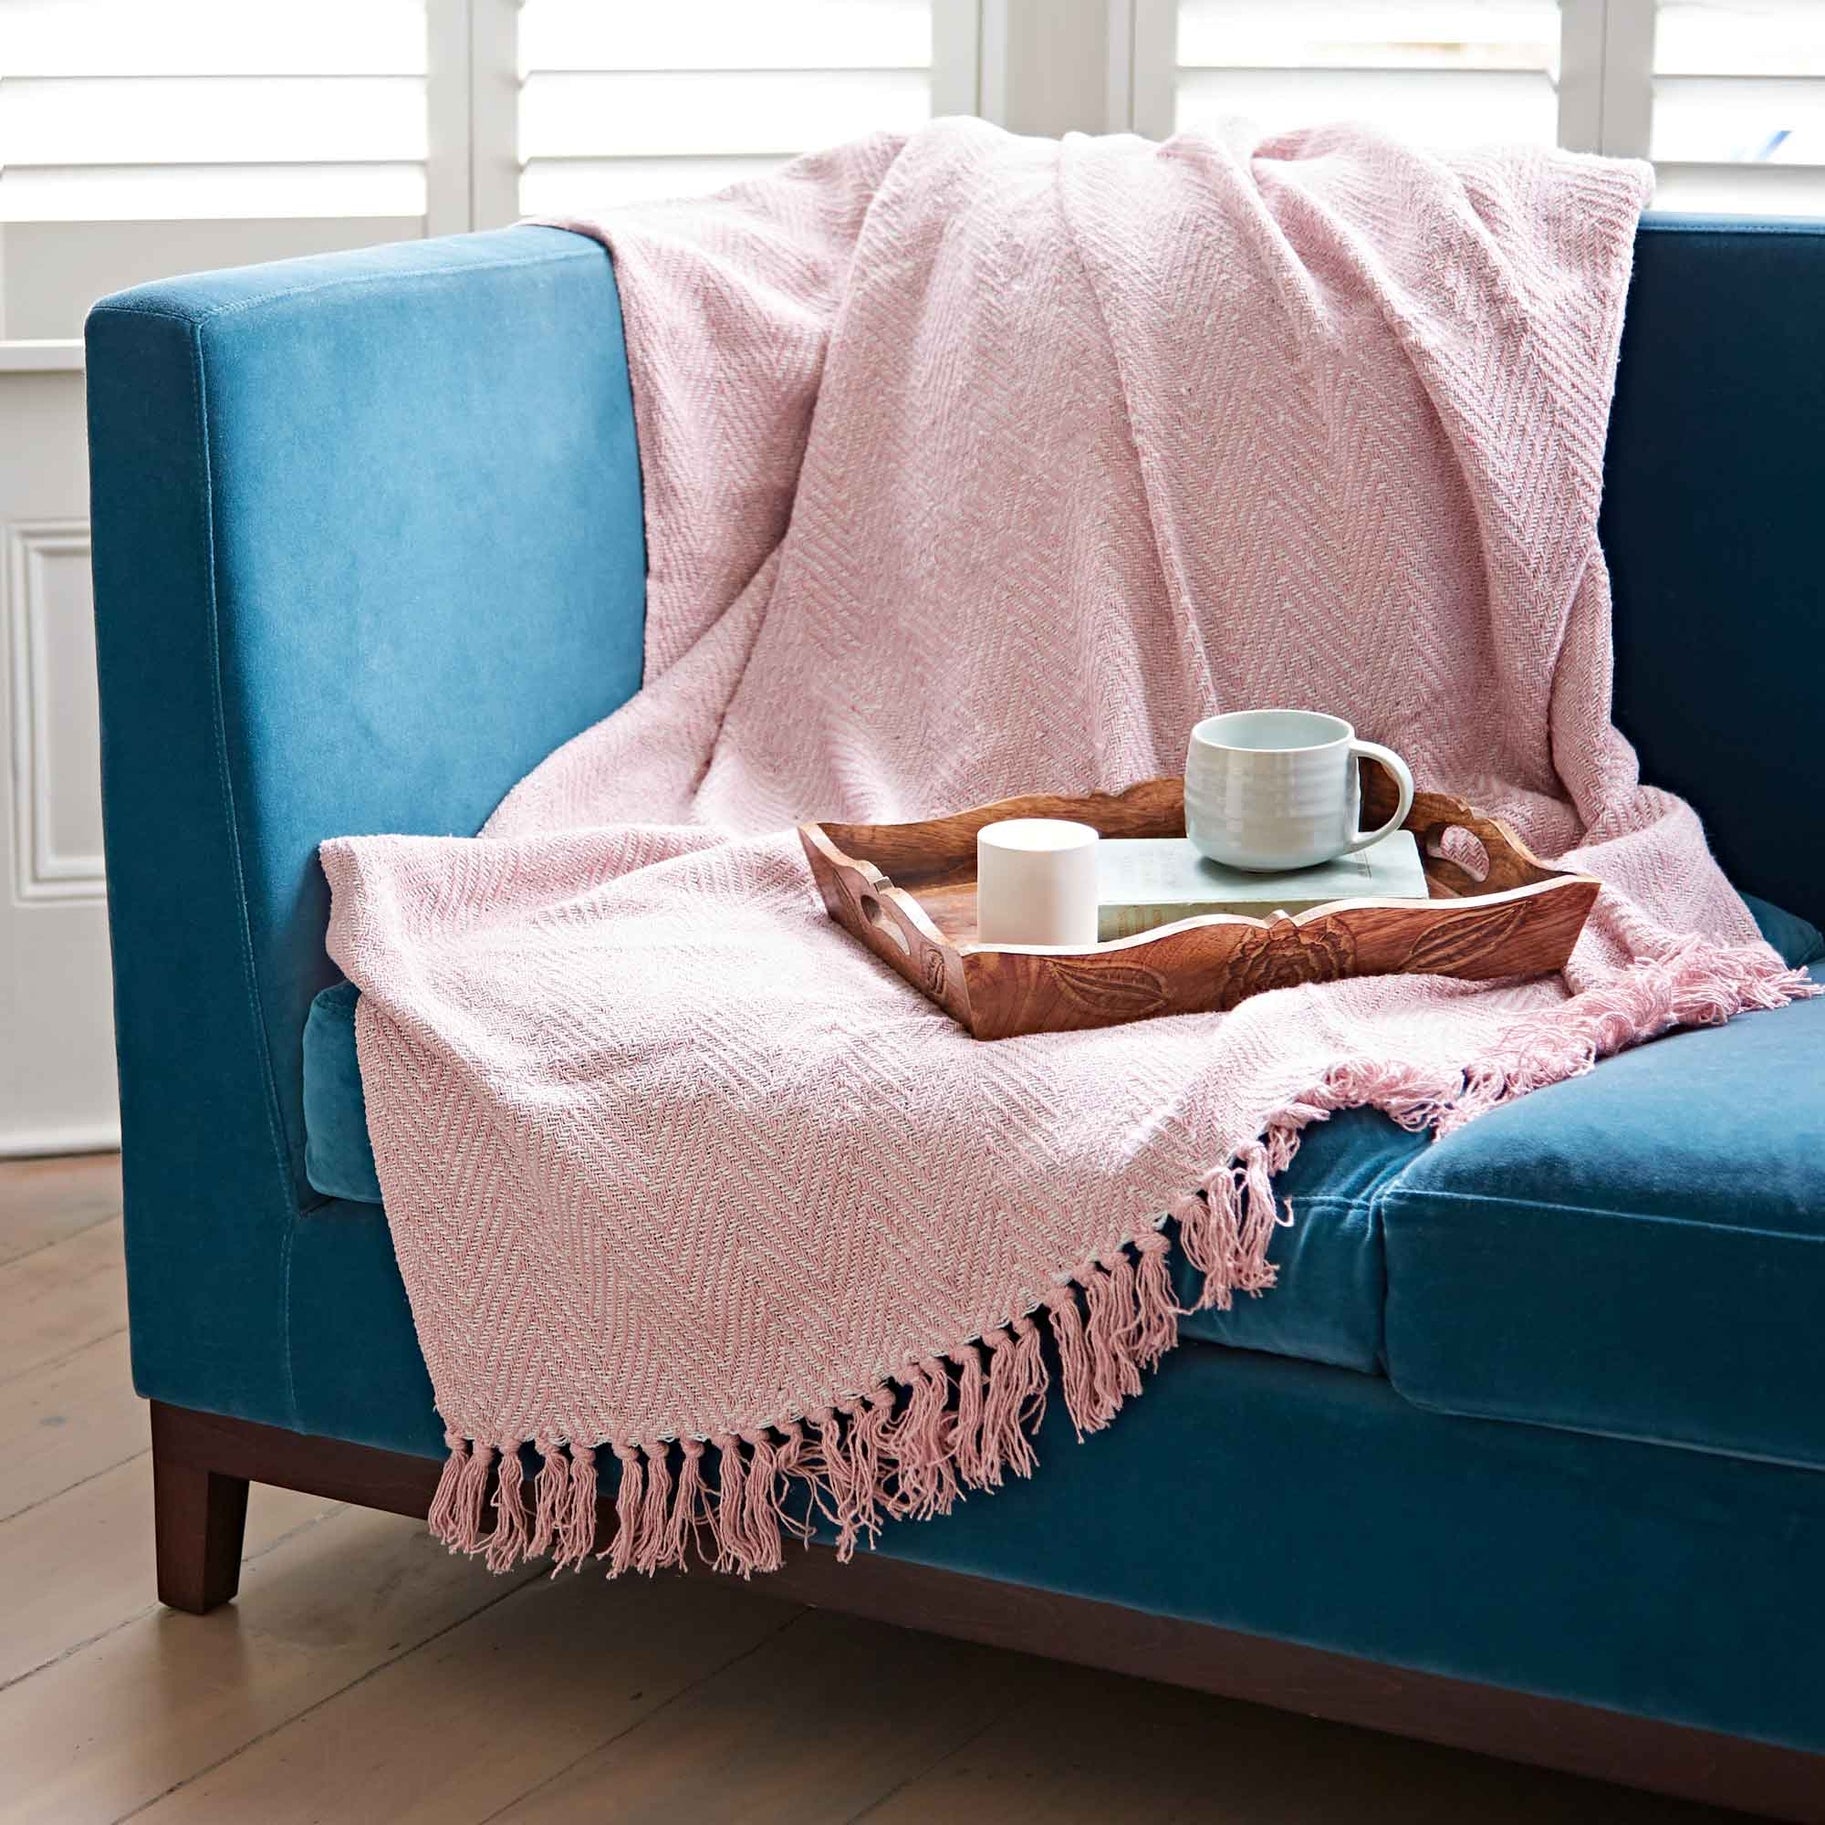 Back in Stock - Recycled Cotton Woven Chevron Throw/Blanket - Pink